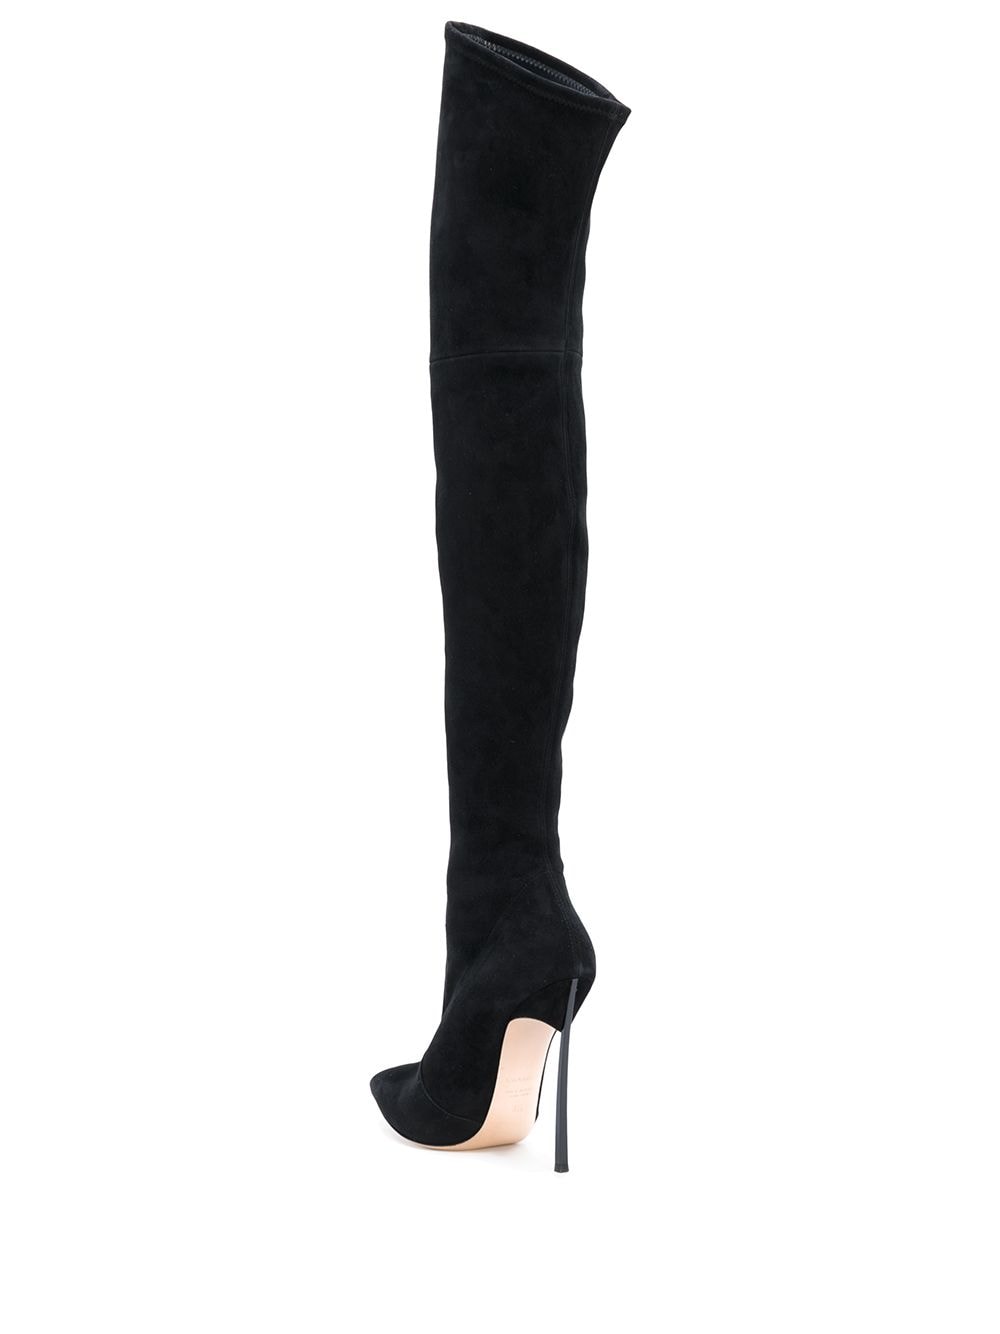 Casadei over-the-knee Blade Boots - Farfetch